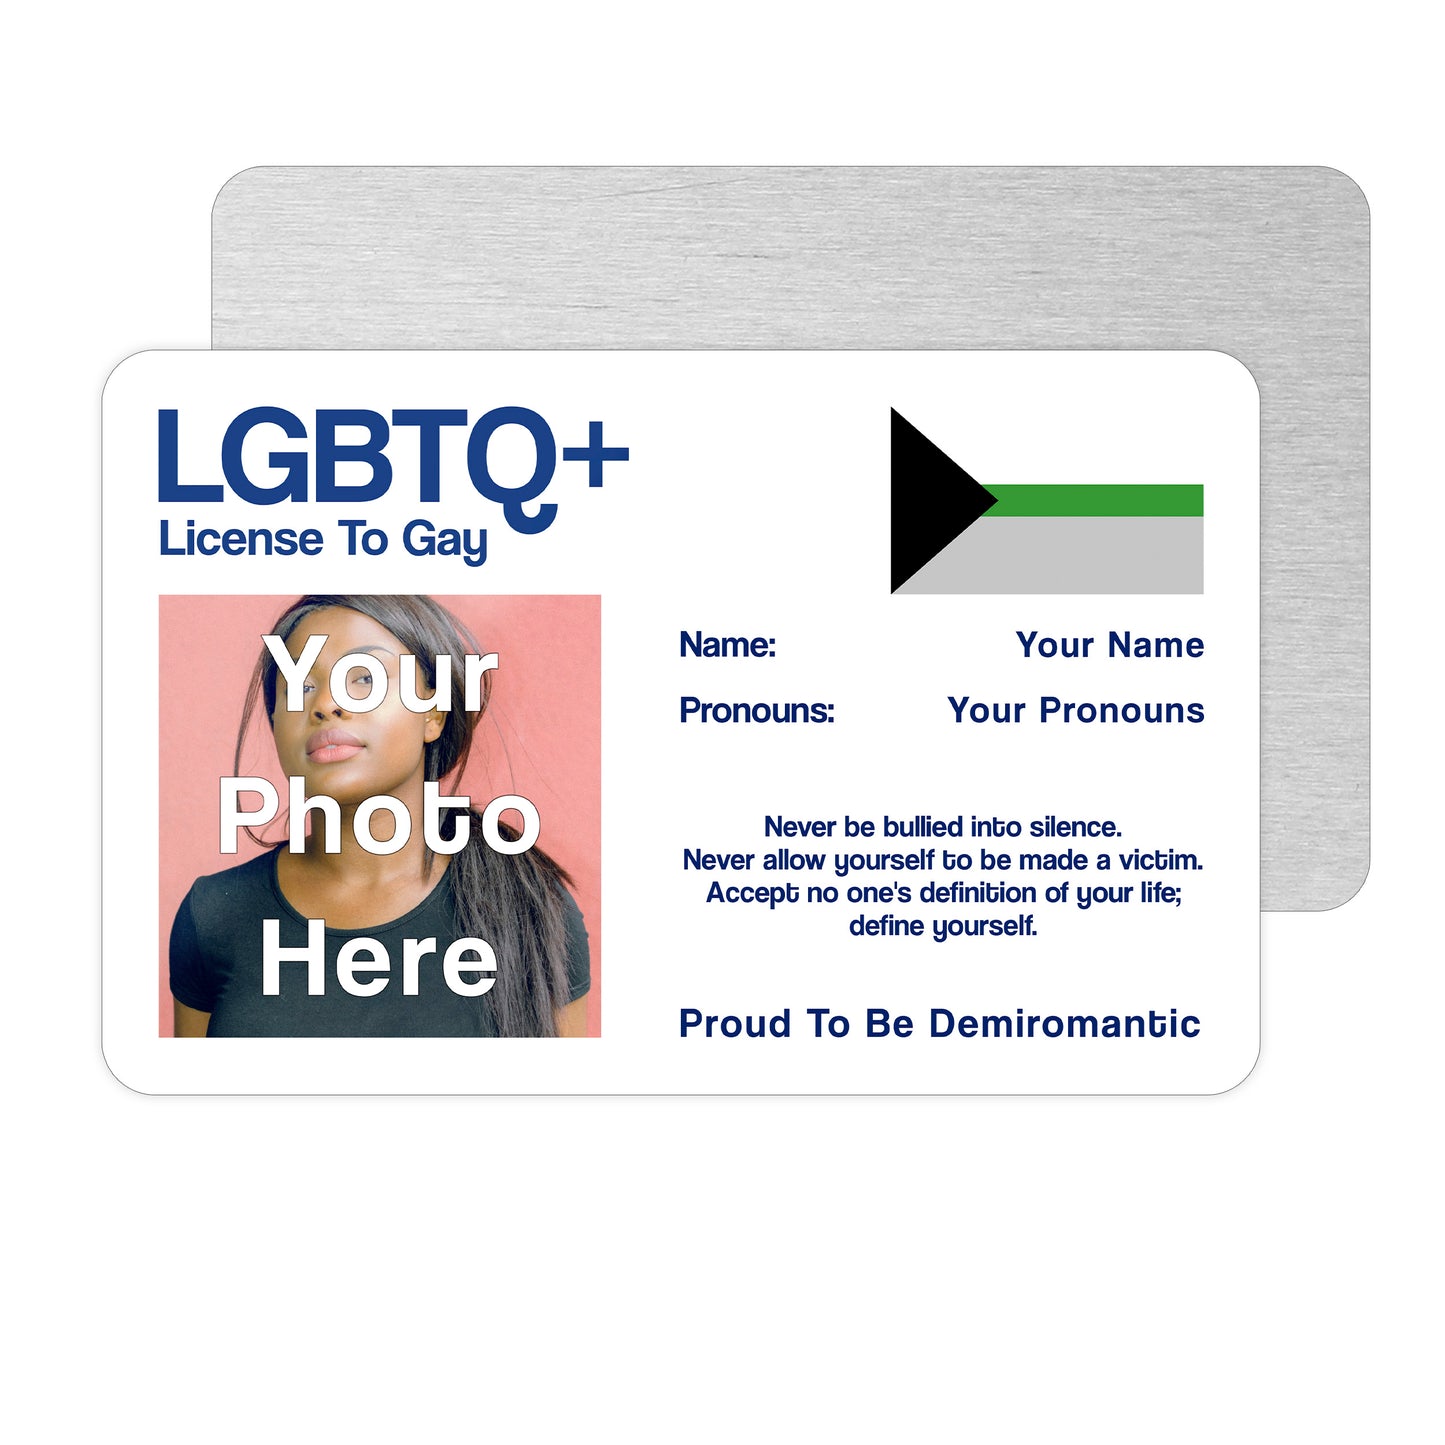 Demiromantic license to gay aluminium wallet card personalised with your name, pronouns and photo